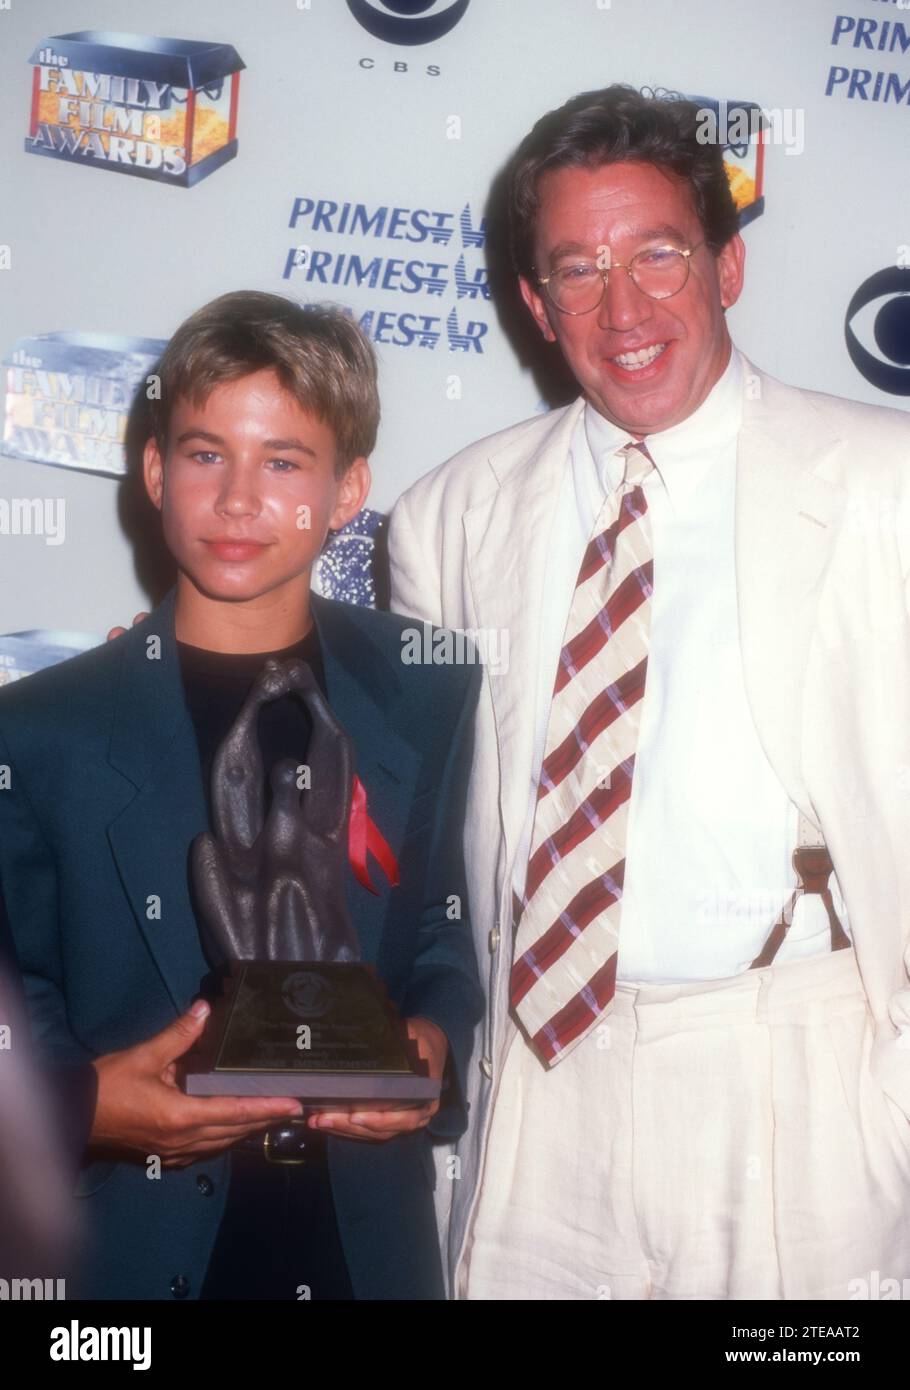 Los Angeles, California, USA 22nd August 1996 Actor Jonathan Taylor Thomas and Actor Tim Allen attend the World Film InstituteÕs Family Film Awards at CBS Television City on August 22, 1996 in Los Angeles, California, USA. Photo by Barry King/Alamy Stock Photo Stock Photo